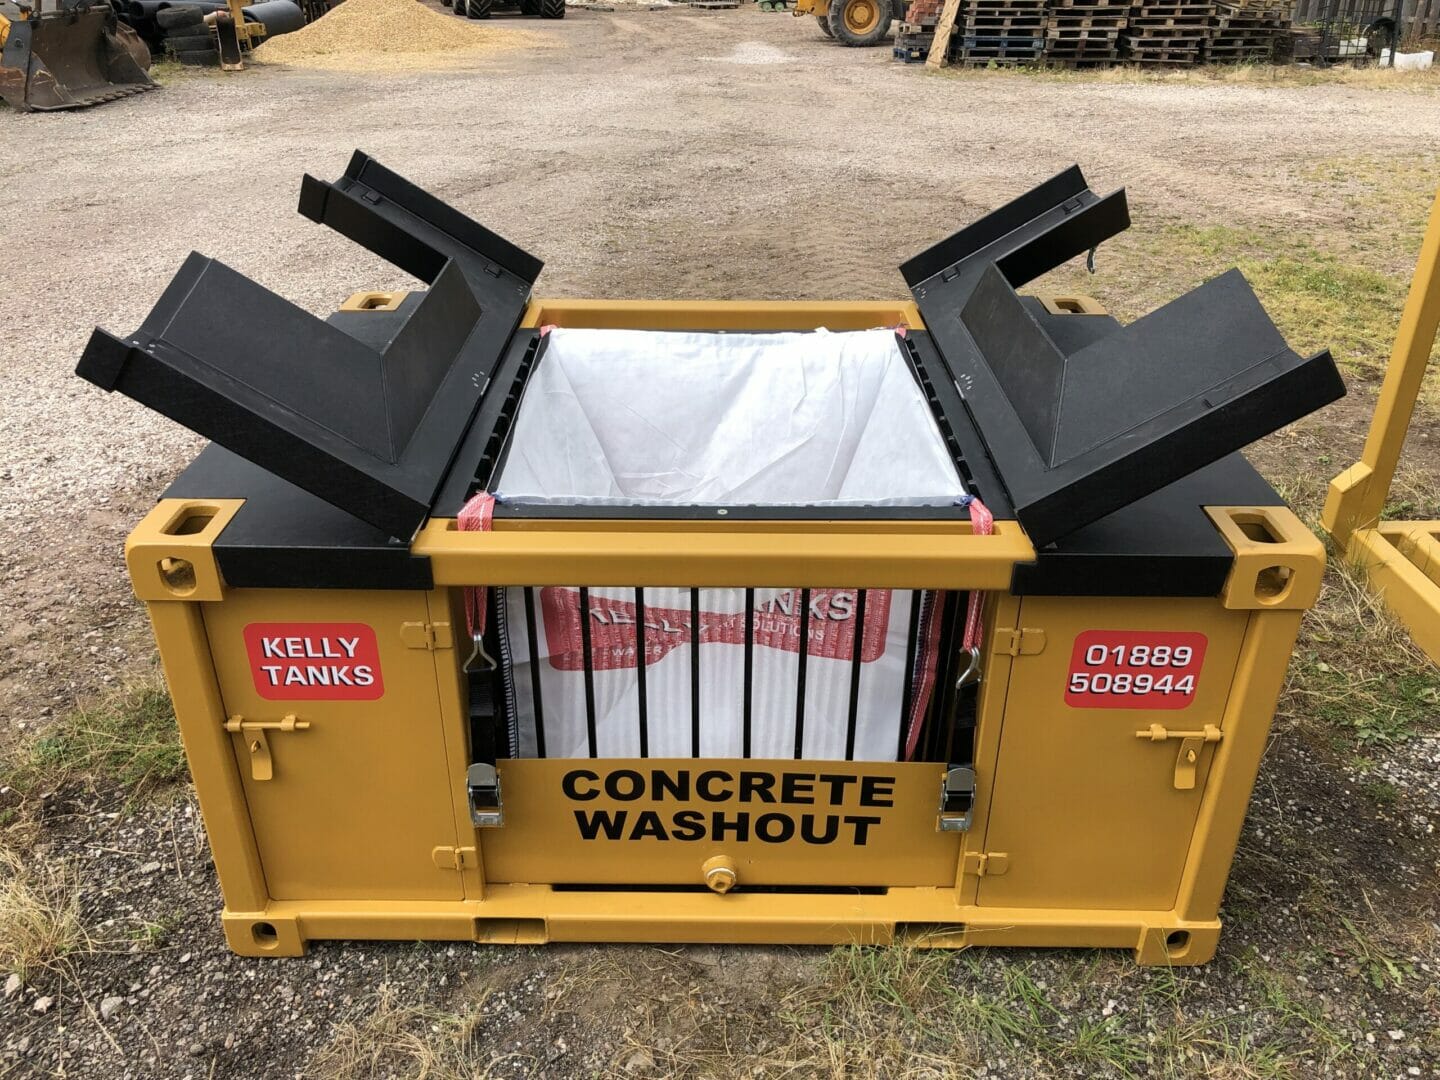 Kelly Tanks provide innovative, cost-effective Concrete Washout Water Treatment Systems for hire or purchase @KellyTanksLtd